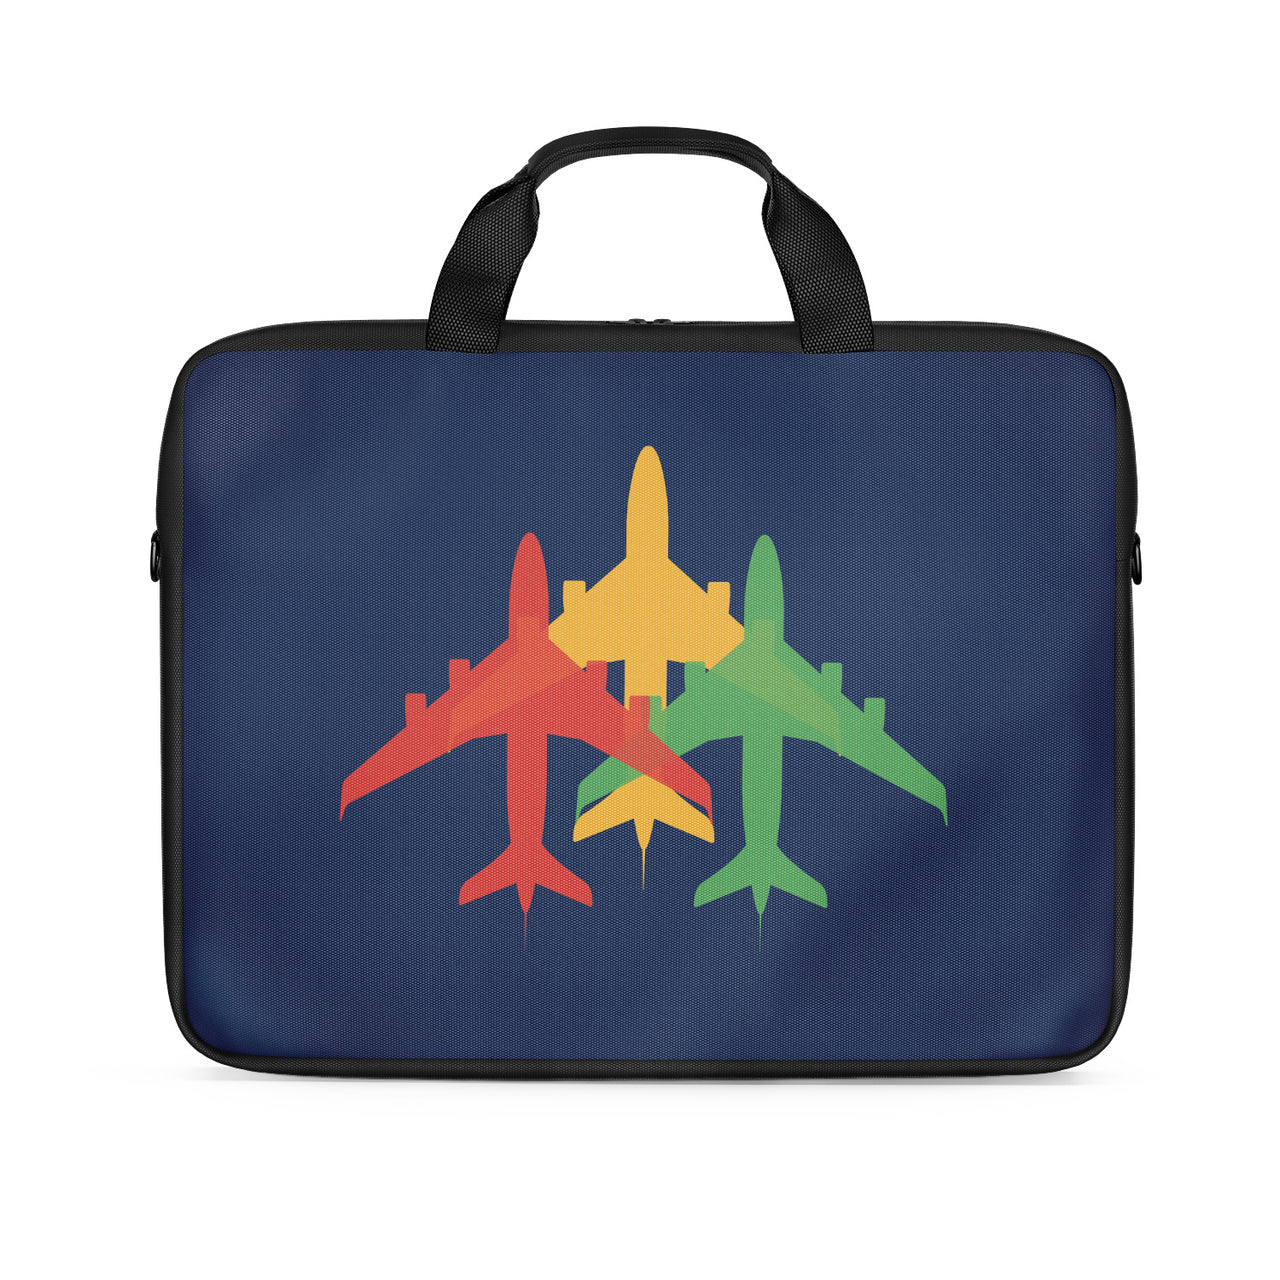 Colourful 3 Airplanes Designed Laptop & Tablet Bags